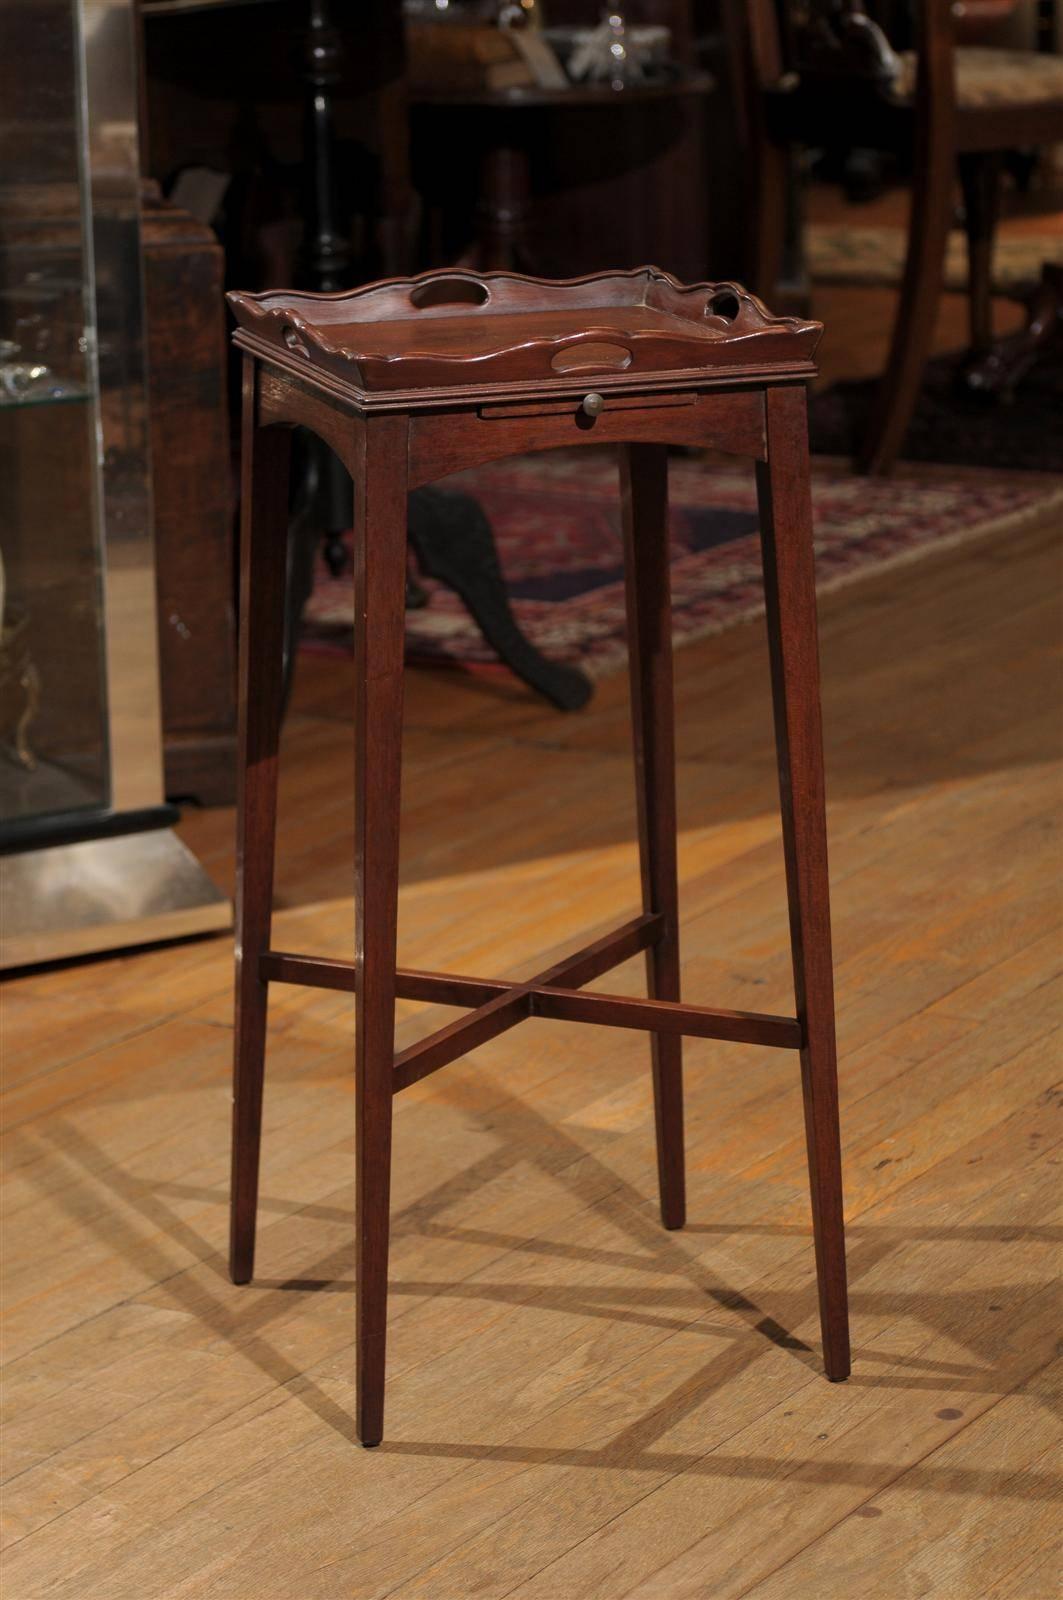 20th century square mahogany side or drinks table with a scalloped gallery tray over an arched frieze holding one candle slide with a brass knob. The table rests on square tapered legs, joined by an X-stretcher.